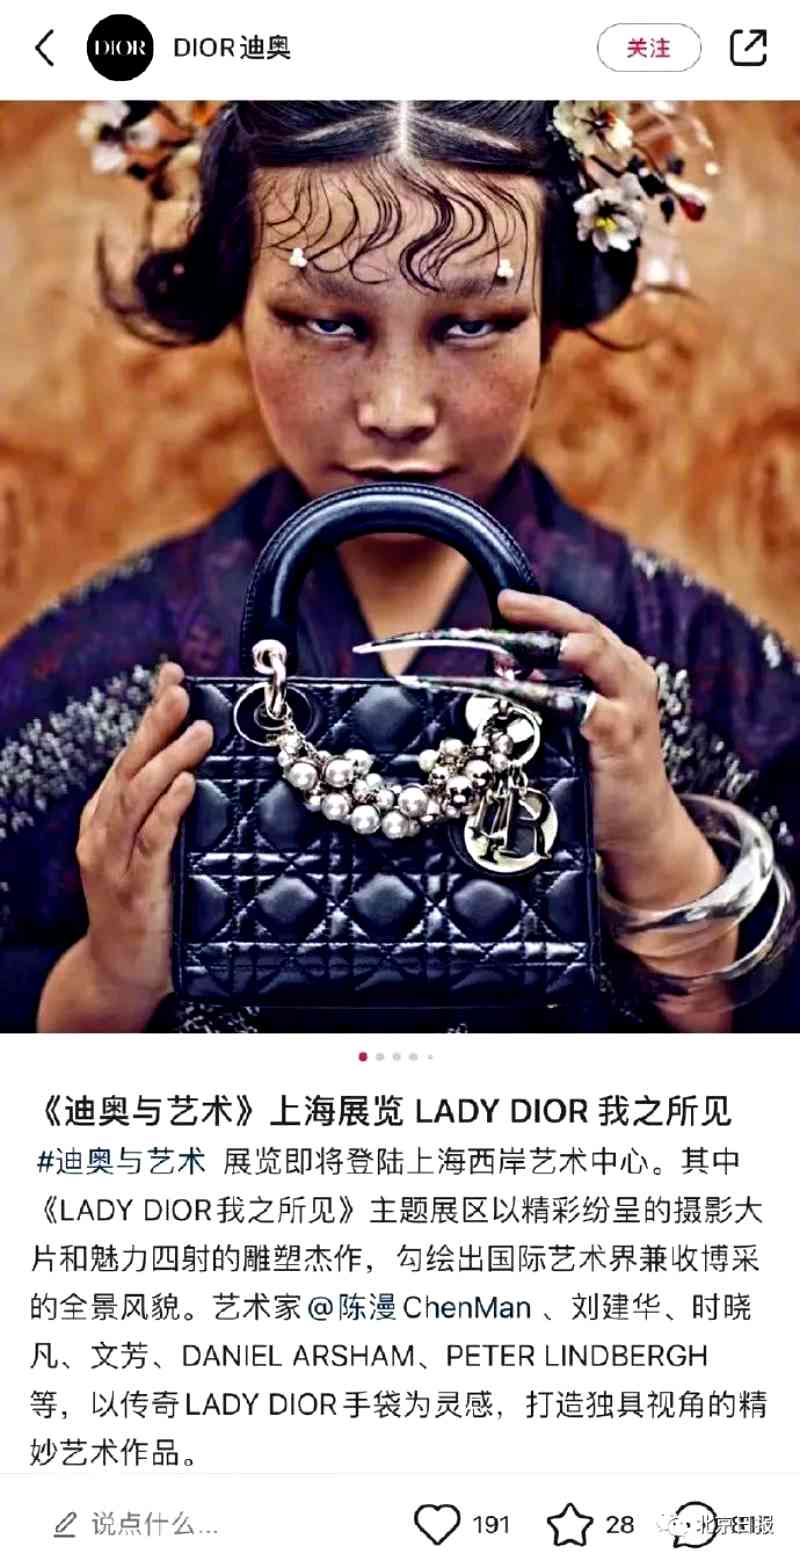 Controversial photo of Asian woman on Dior's Weibo